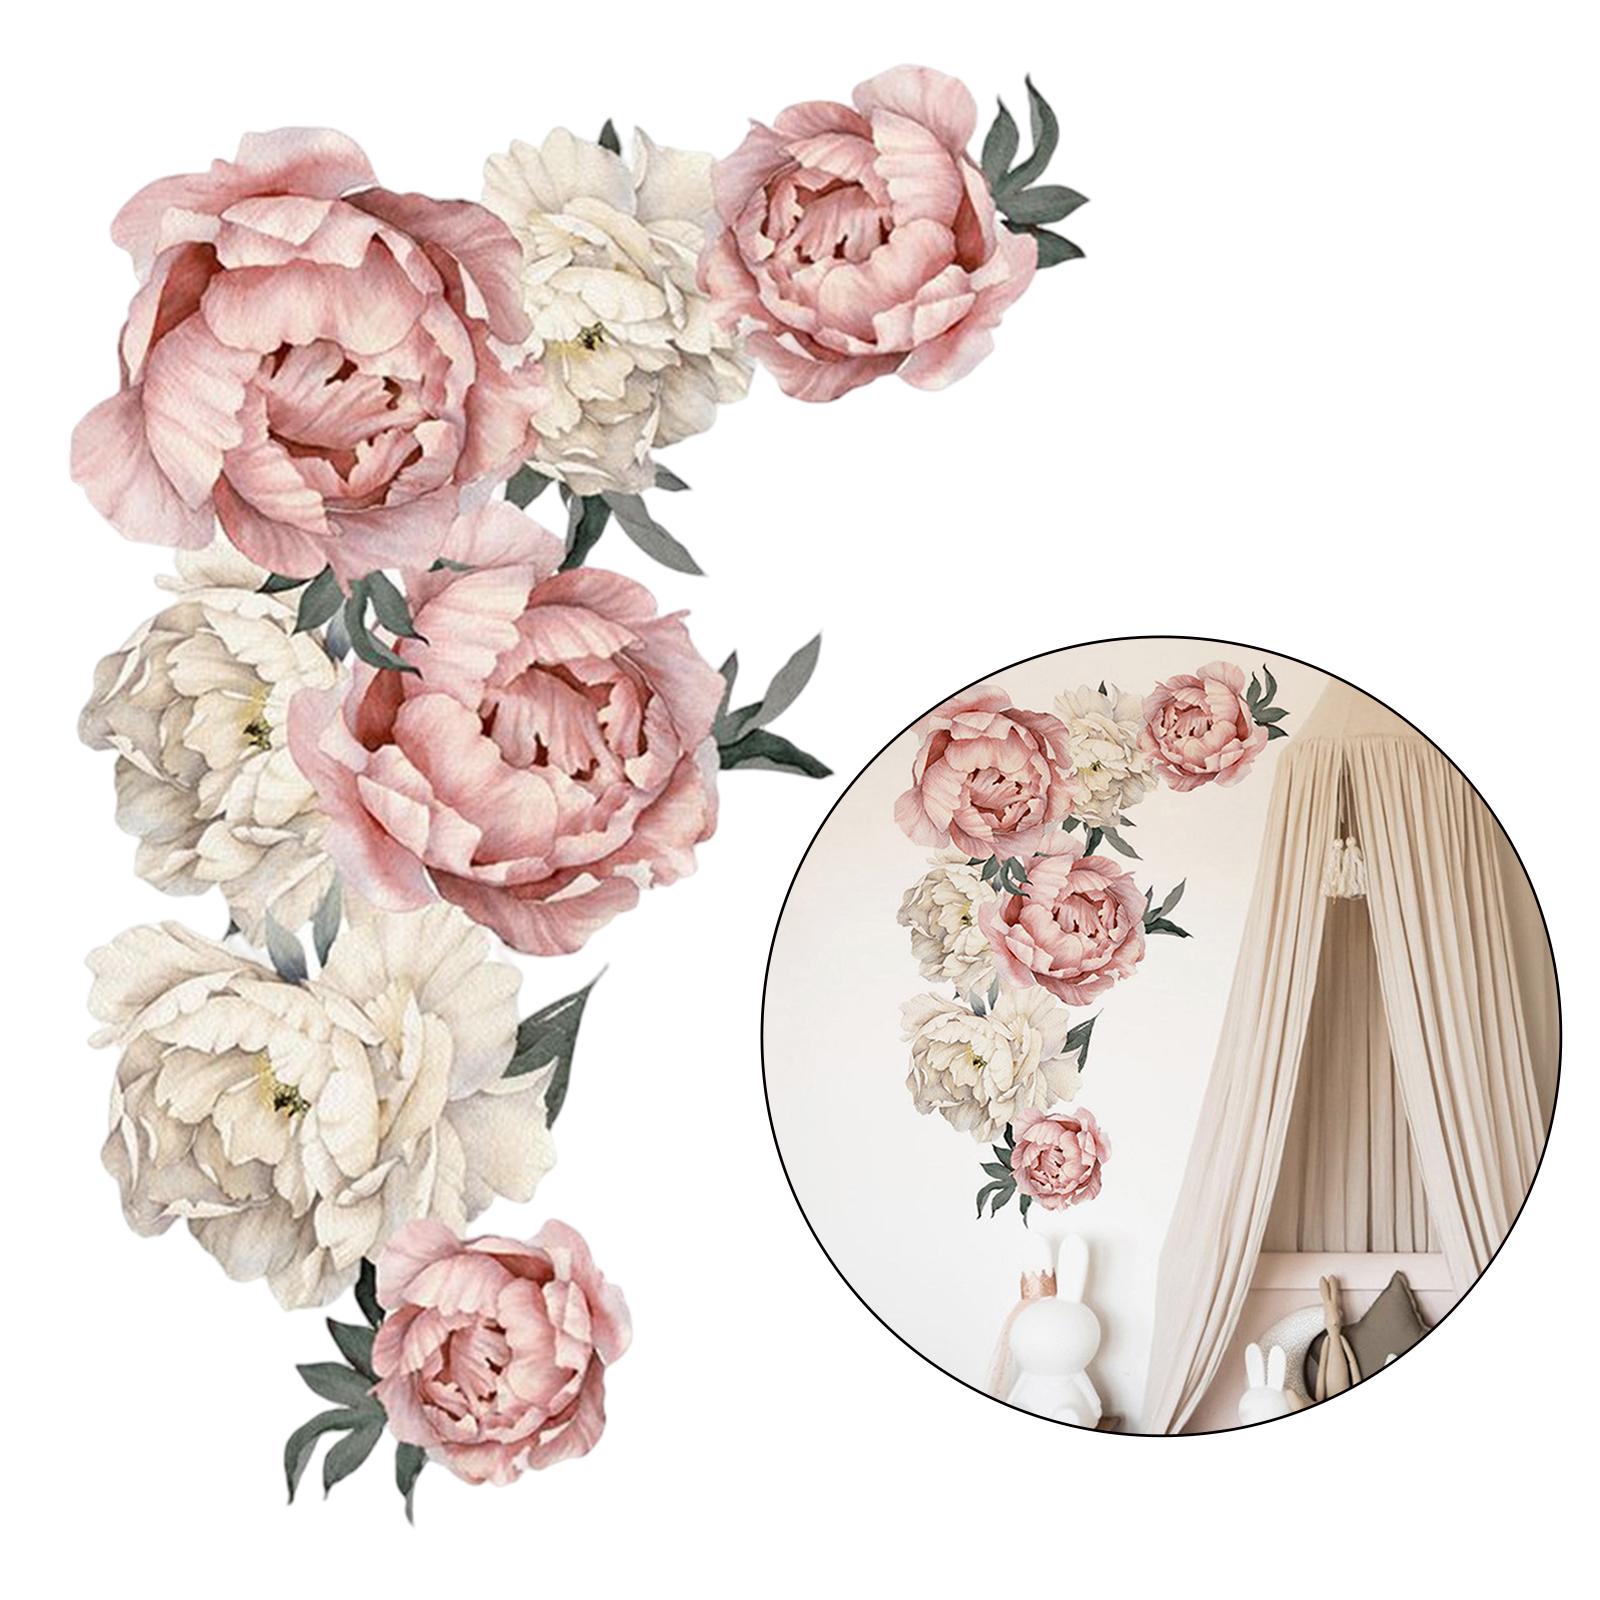 Peony Rose Flowers Wall Sticker for Bedroom Nursery Room Decorations Pink